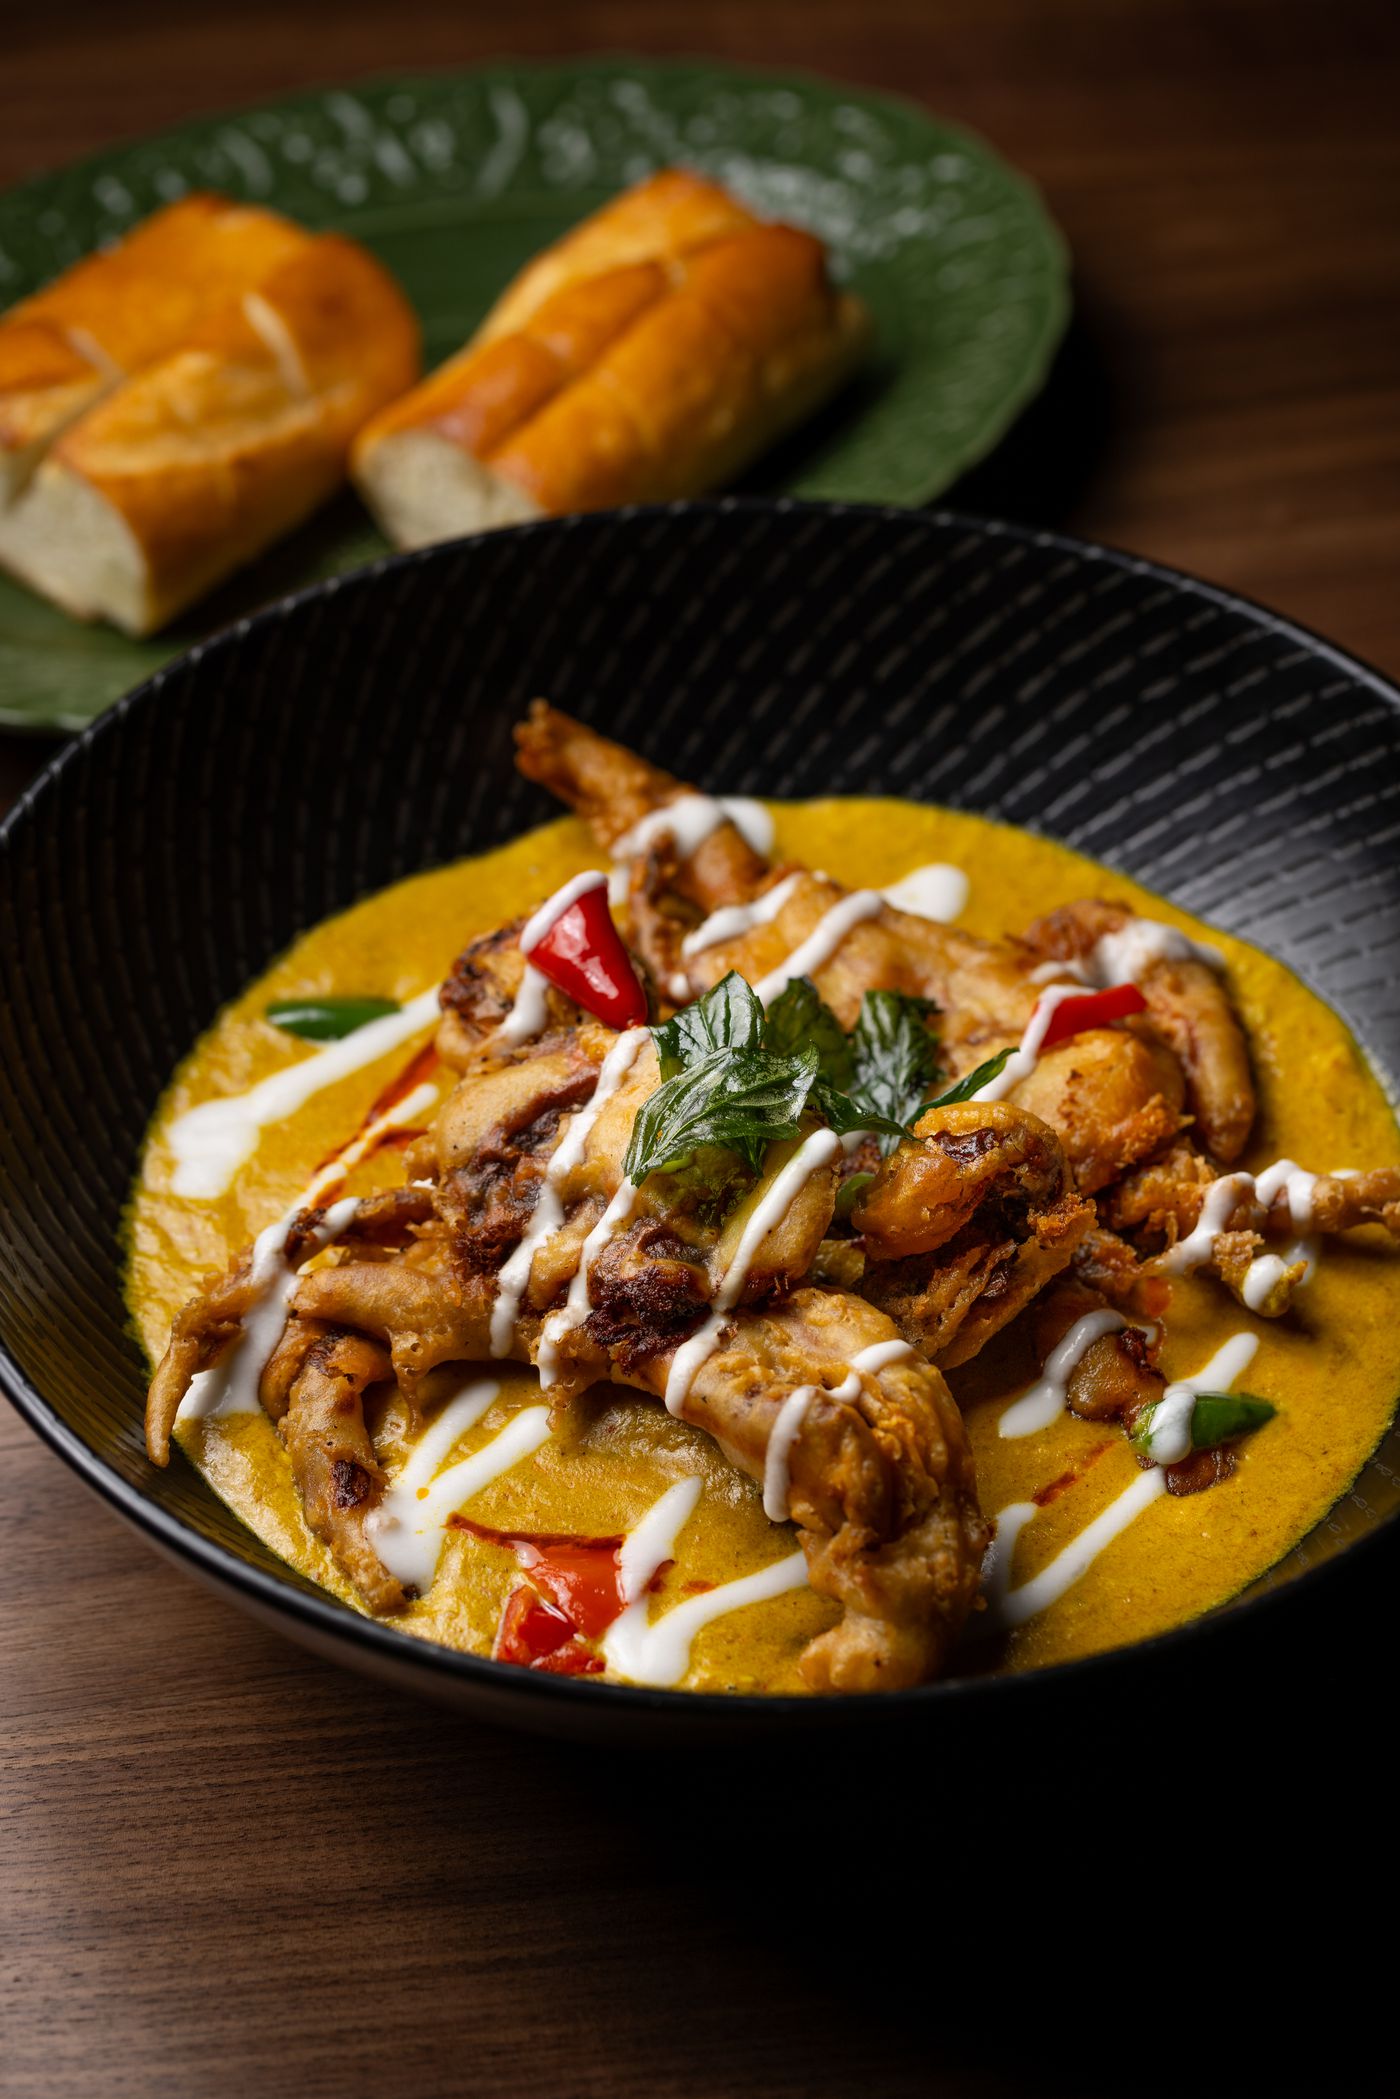 pasadena’s biggest new opening boasts sultry southeast asian fare